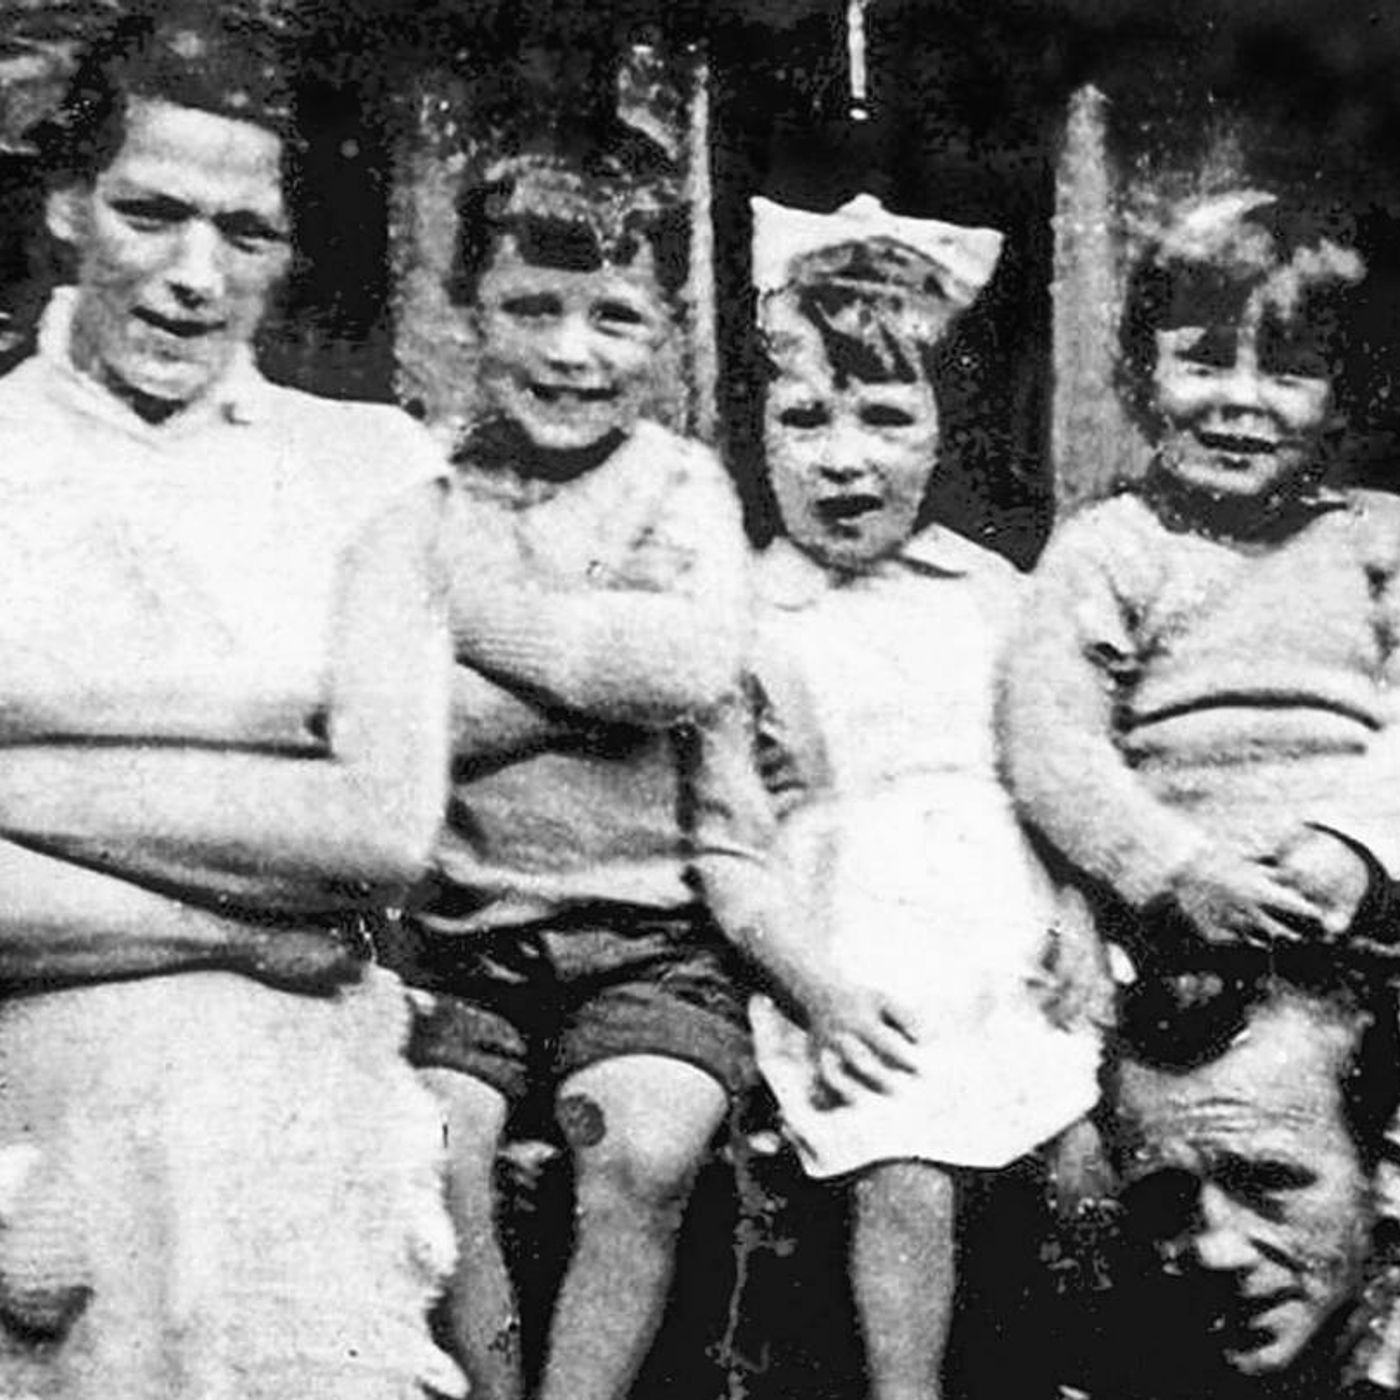 The Disappearance of Jean McConville